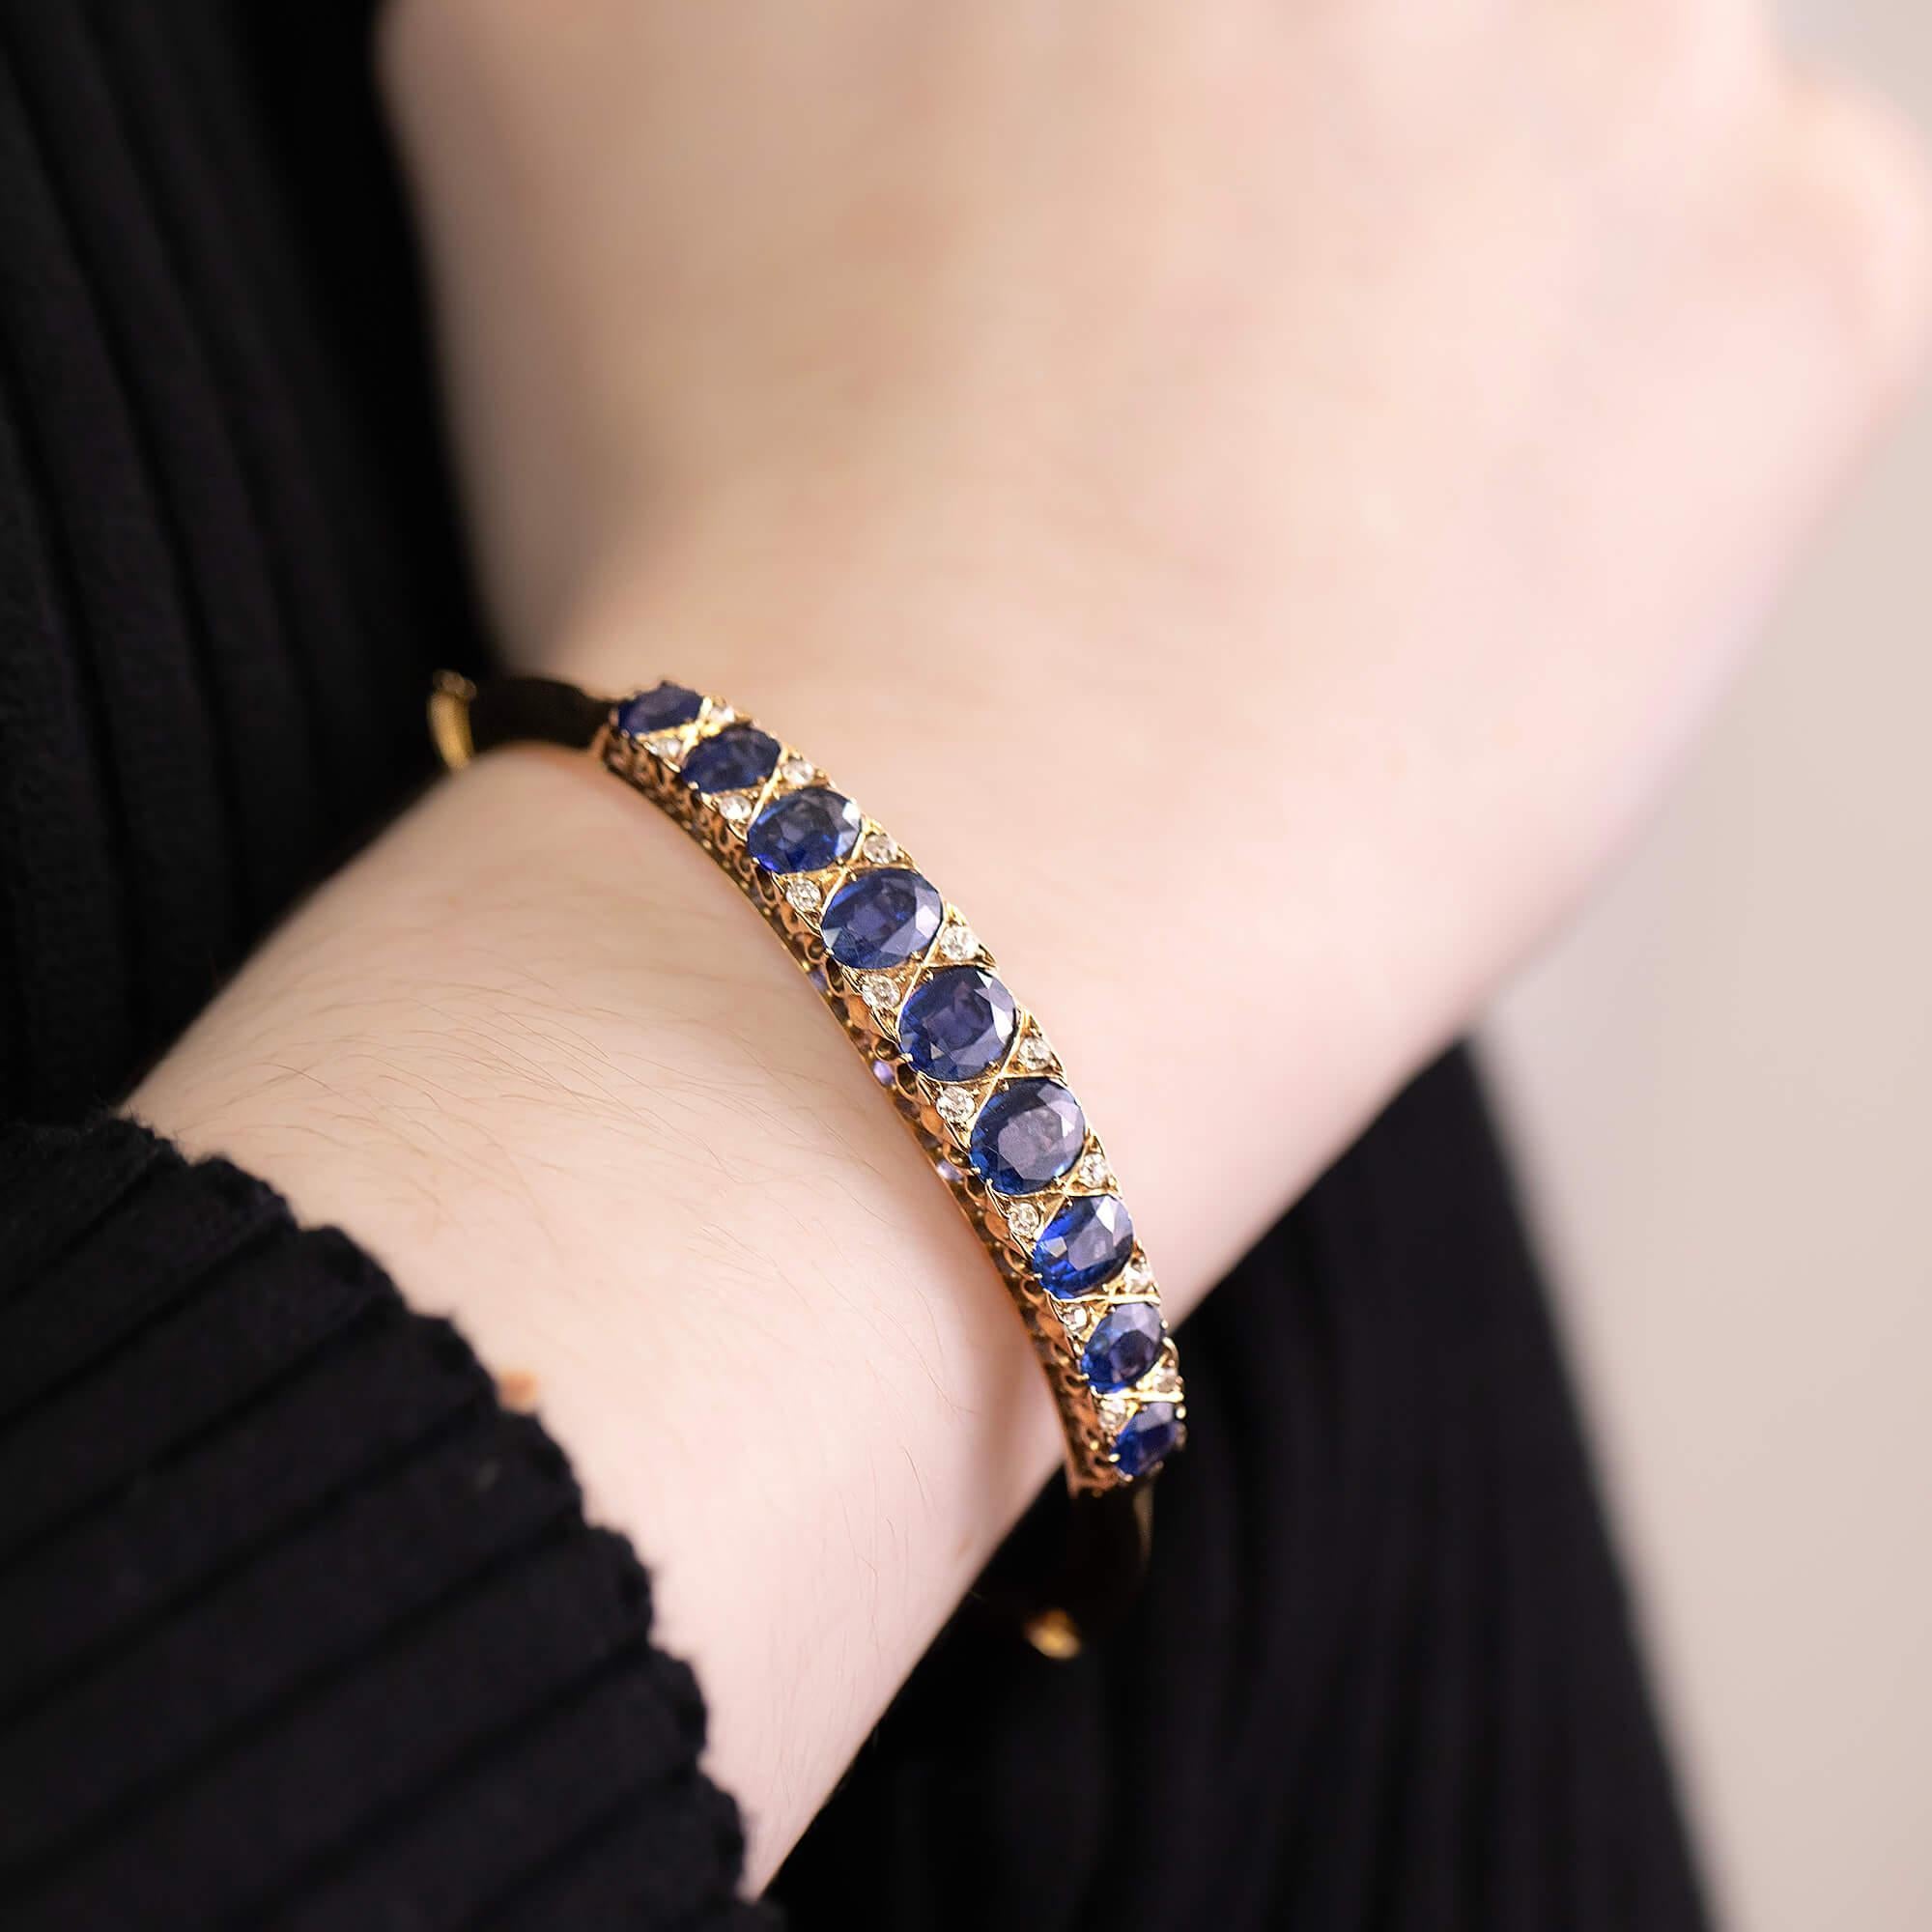 Edwardian sapphire and diamond-hinged bangle featuring beautiful gallery work and a safety chain.

Gemstone: Nine Oval-cut sapphires, grading from (4.85 x 3.9mm to 7.3 x 5.7mm), fine strong dark blue material, estimated total weight 7.50ct
Diamond: